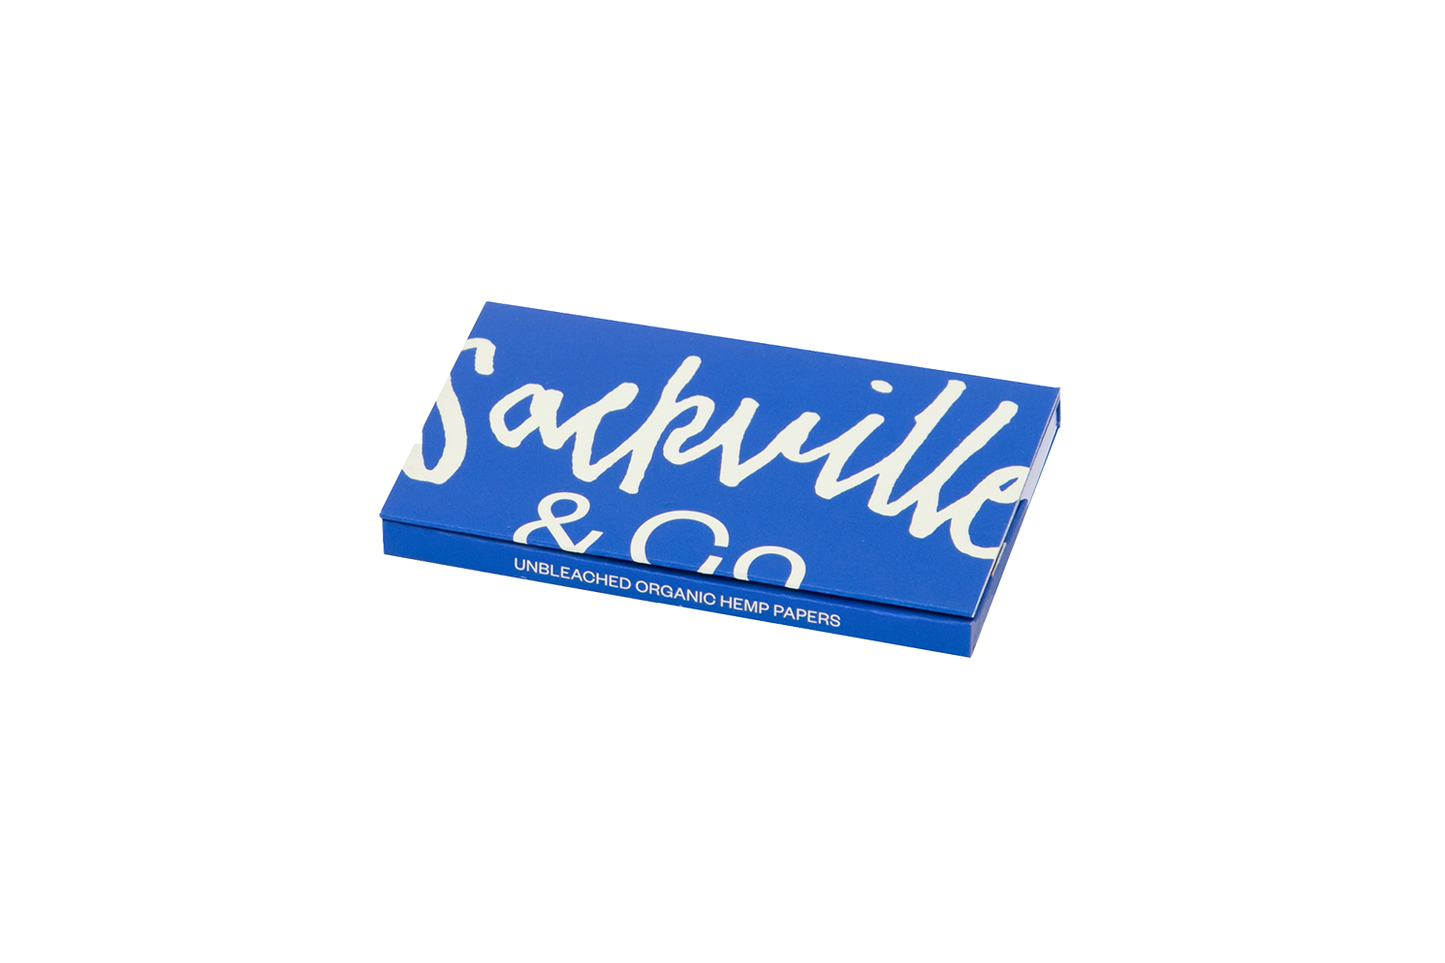 CASE - BLUE ROLLING PAPERS - Sackville & Co.